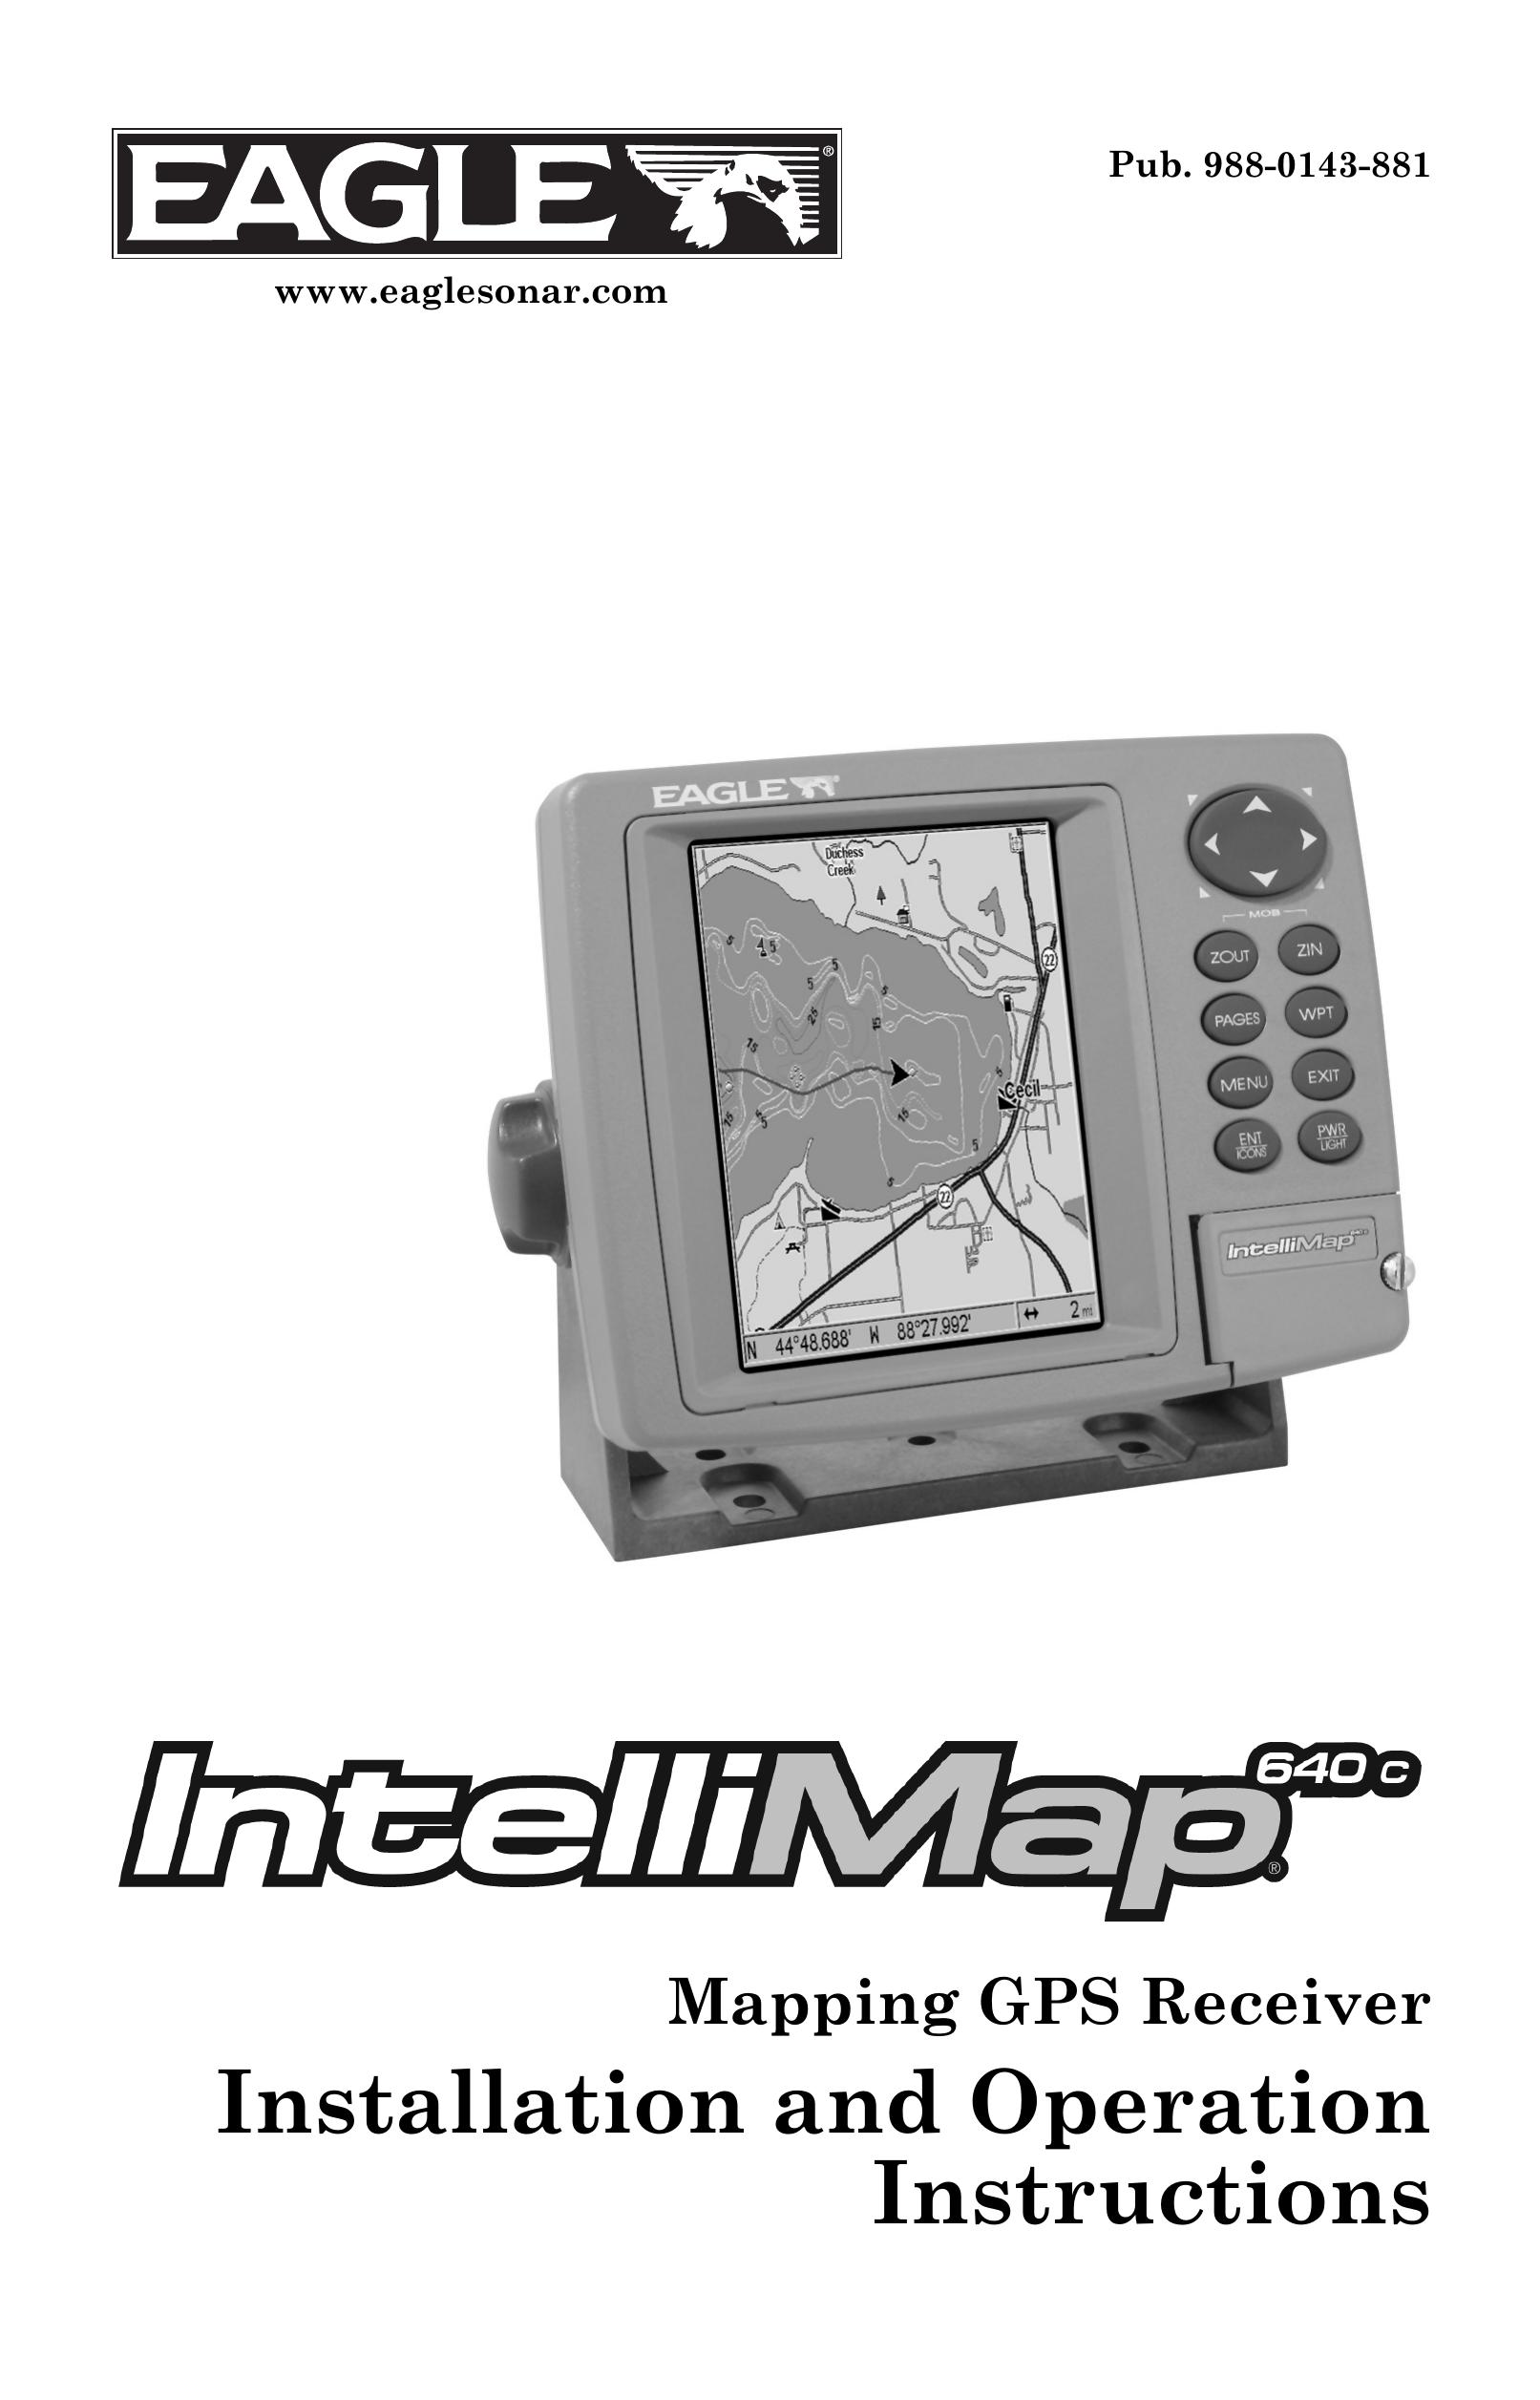 Eagle Electronics Mapping GPS Receiver Marine GPS System User Manual